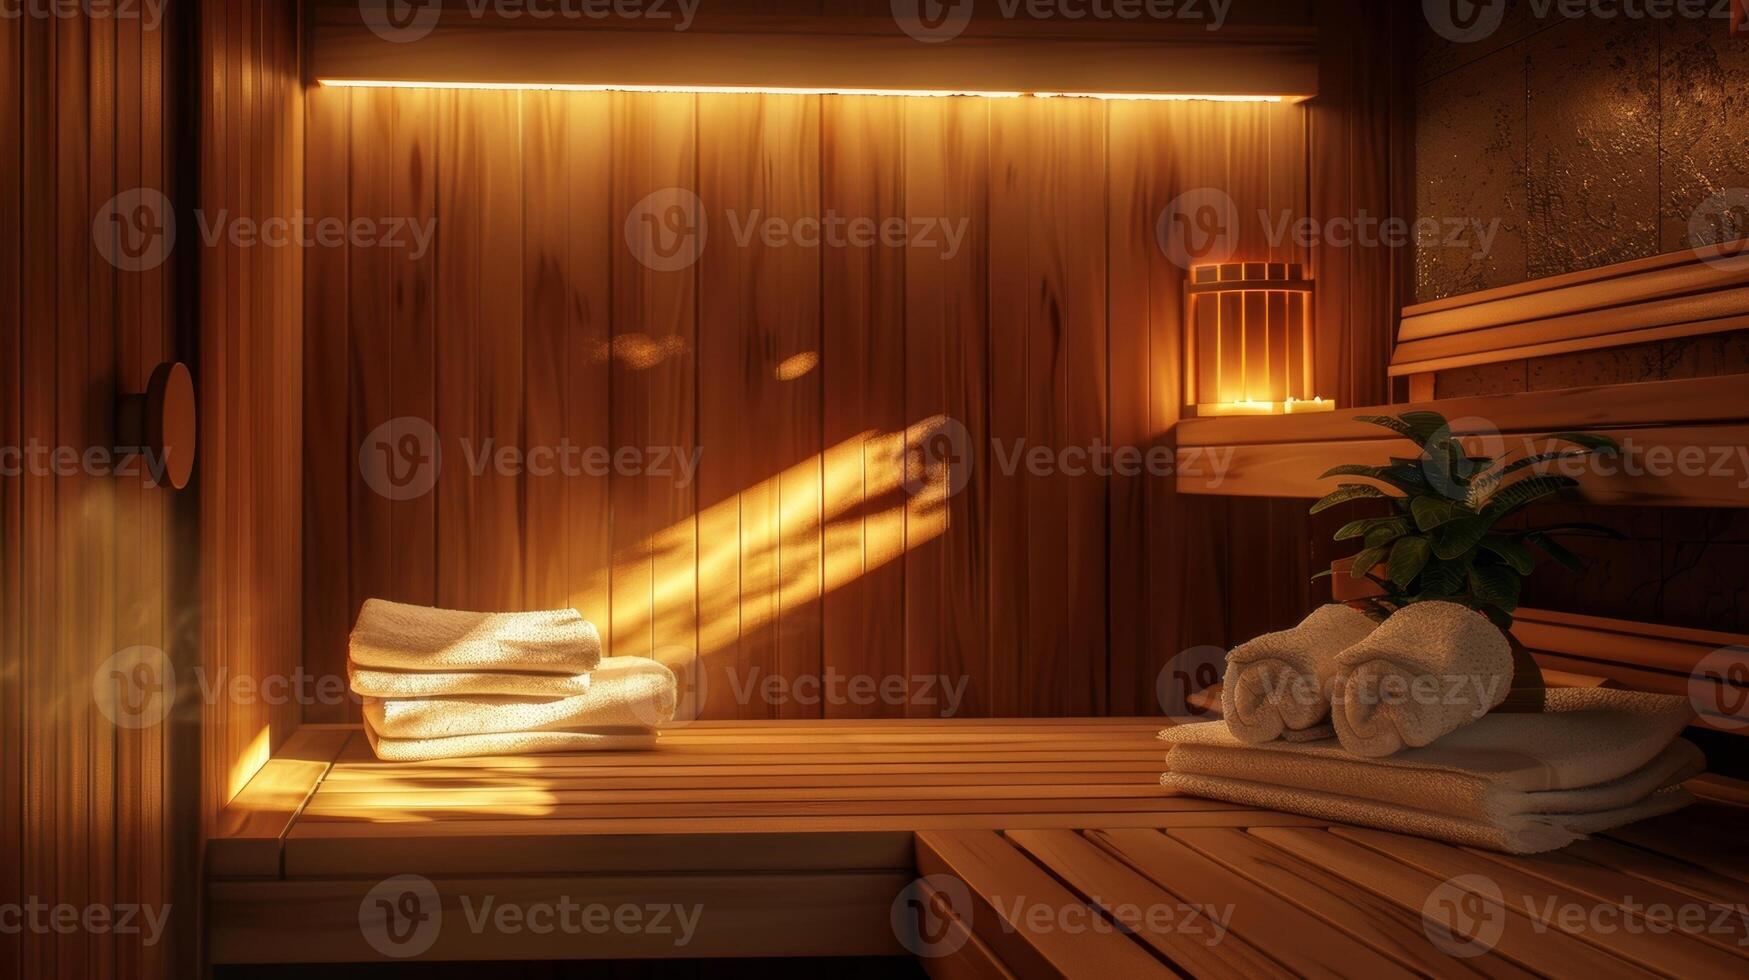 A cozy sauna room with soft lighting and a stack of towels inviting individuals to use it as a tool for better sleep. photo